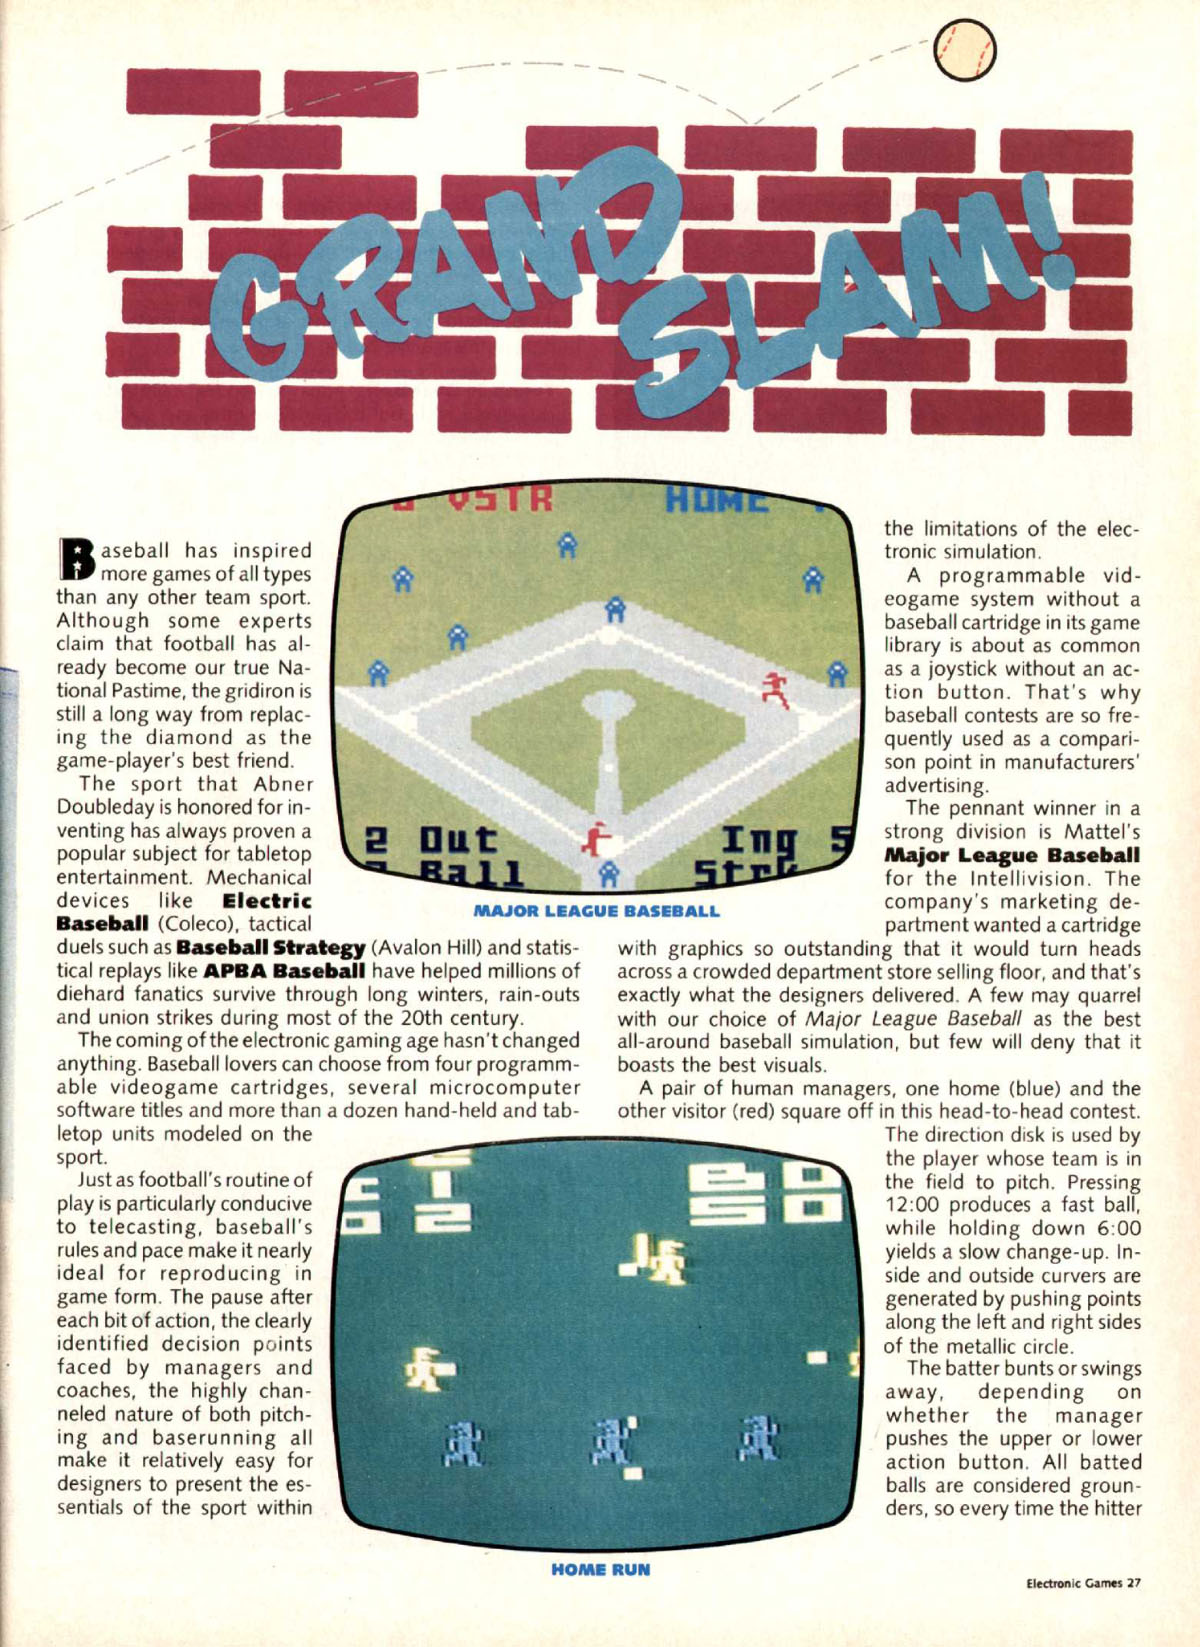 Grand Slam!, Electronic Games June 1982 page 27